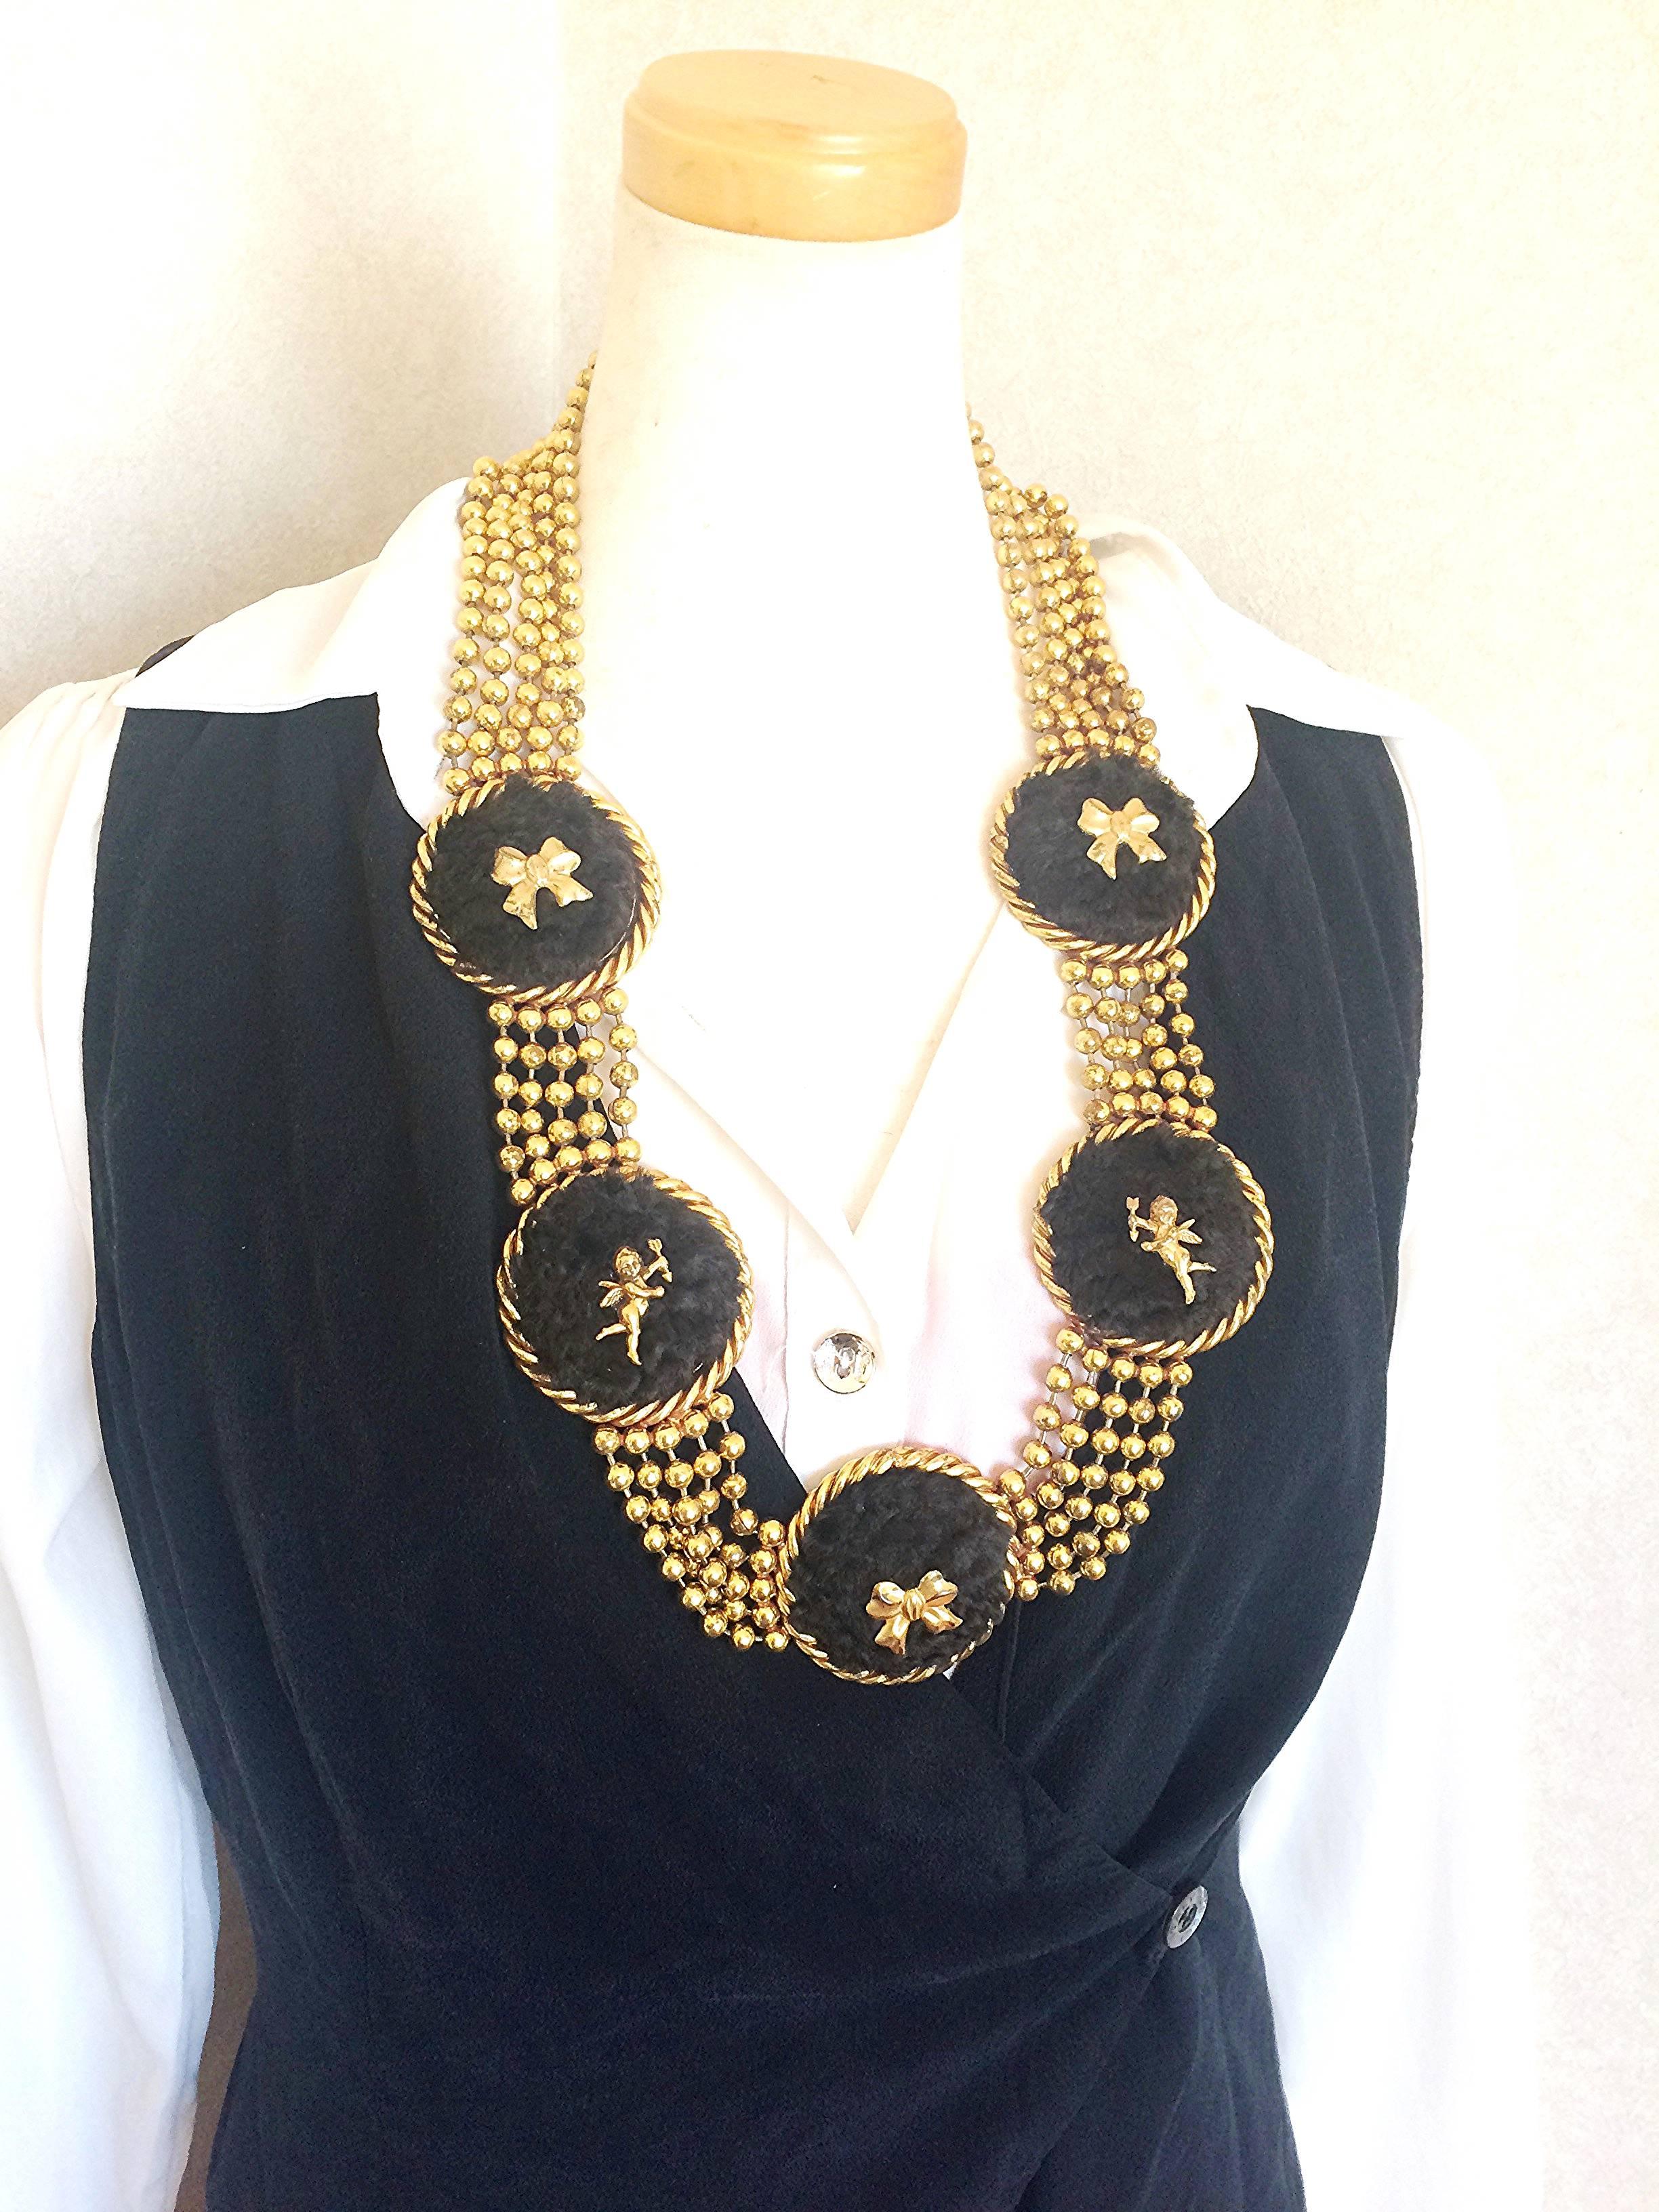 Beige Vintage Karl Lagerfeld golden ball chain belt, necklace with extra large motifs.